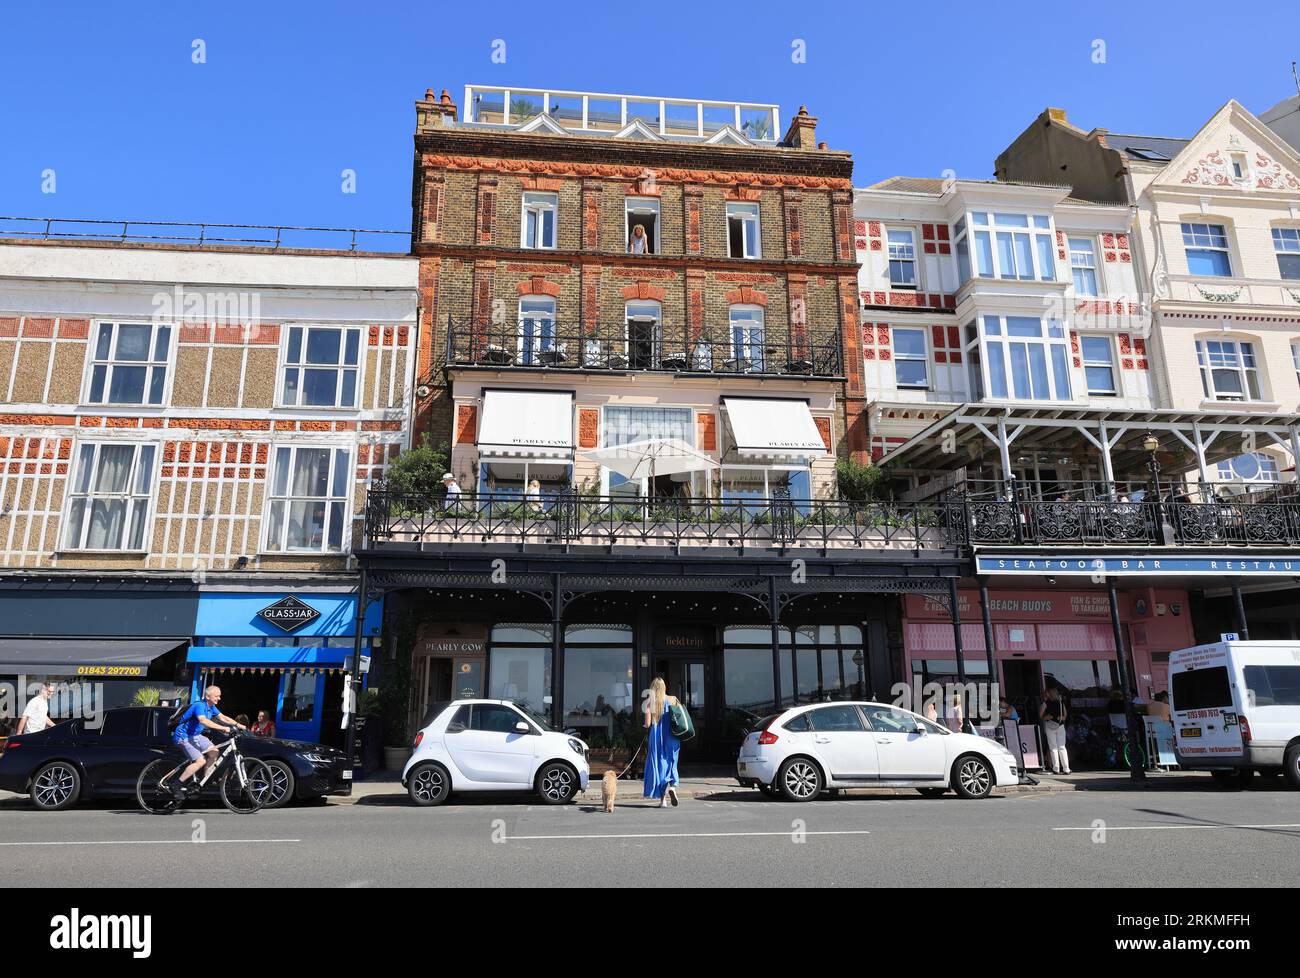 The sea facing facade of the new No 42 by Guesthouse (formerly Sands hotel), with, & the 1st floor Pearly Cow restaurant, in Margate, east Kent, UK Stock Photo